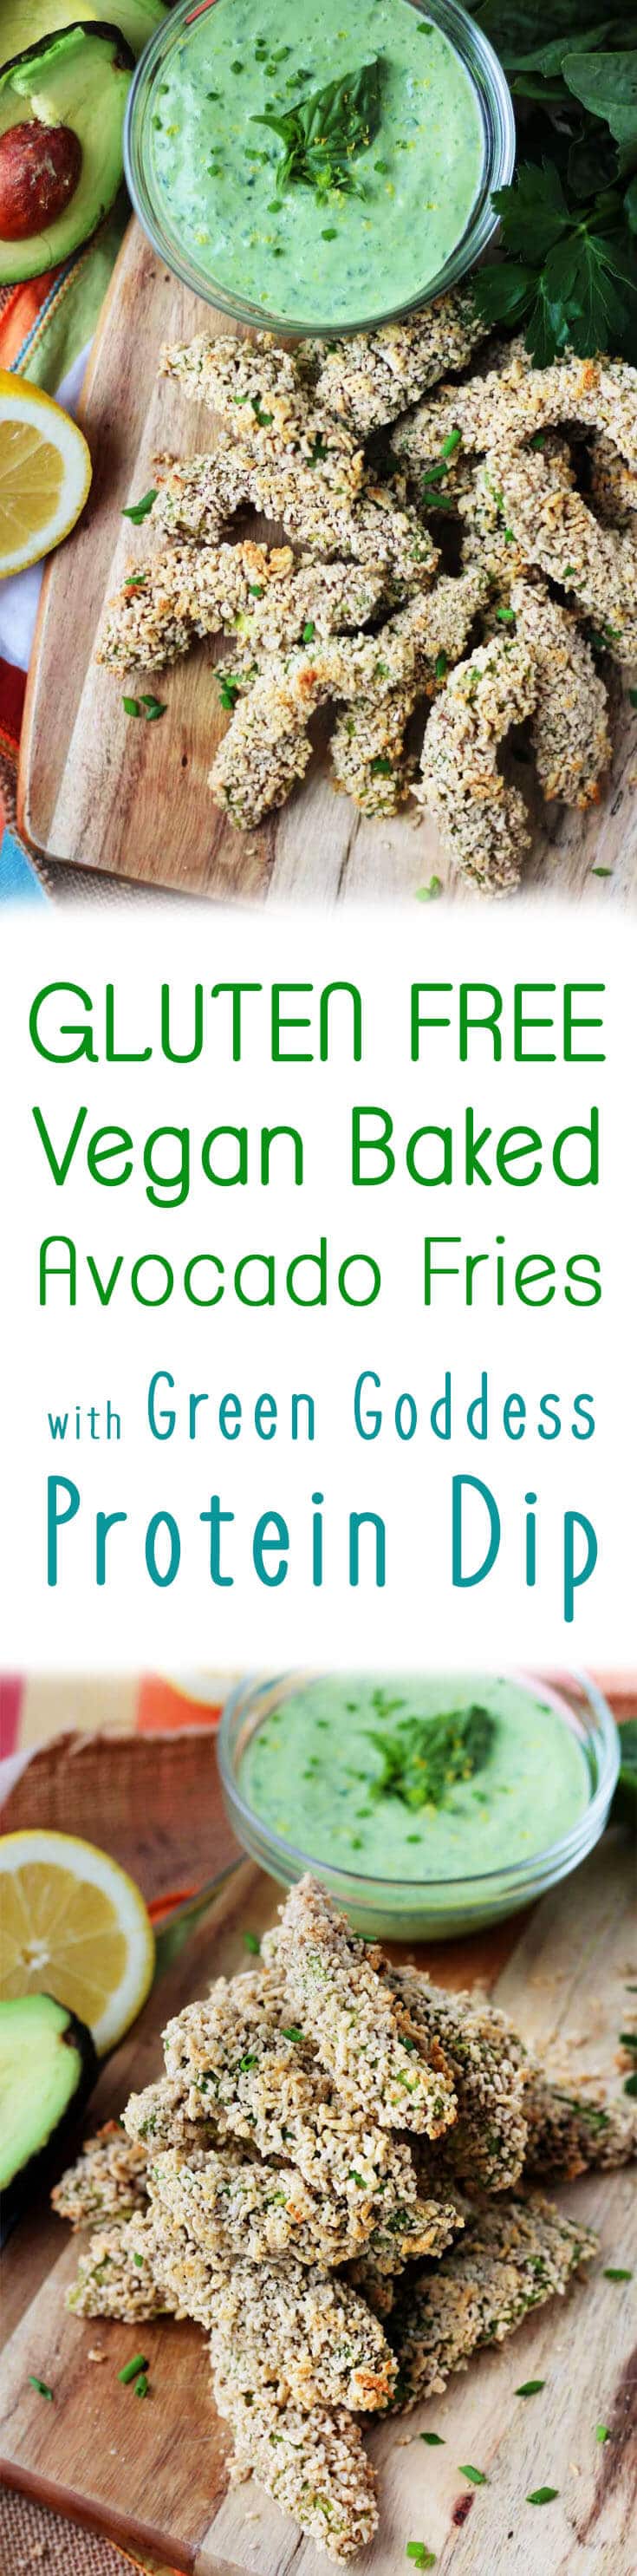 Pinterest image with text saying \"gluten free vegan baked avocado fries with green goddess protein dip\" overtop of photos of avocado fries.